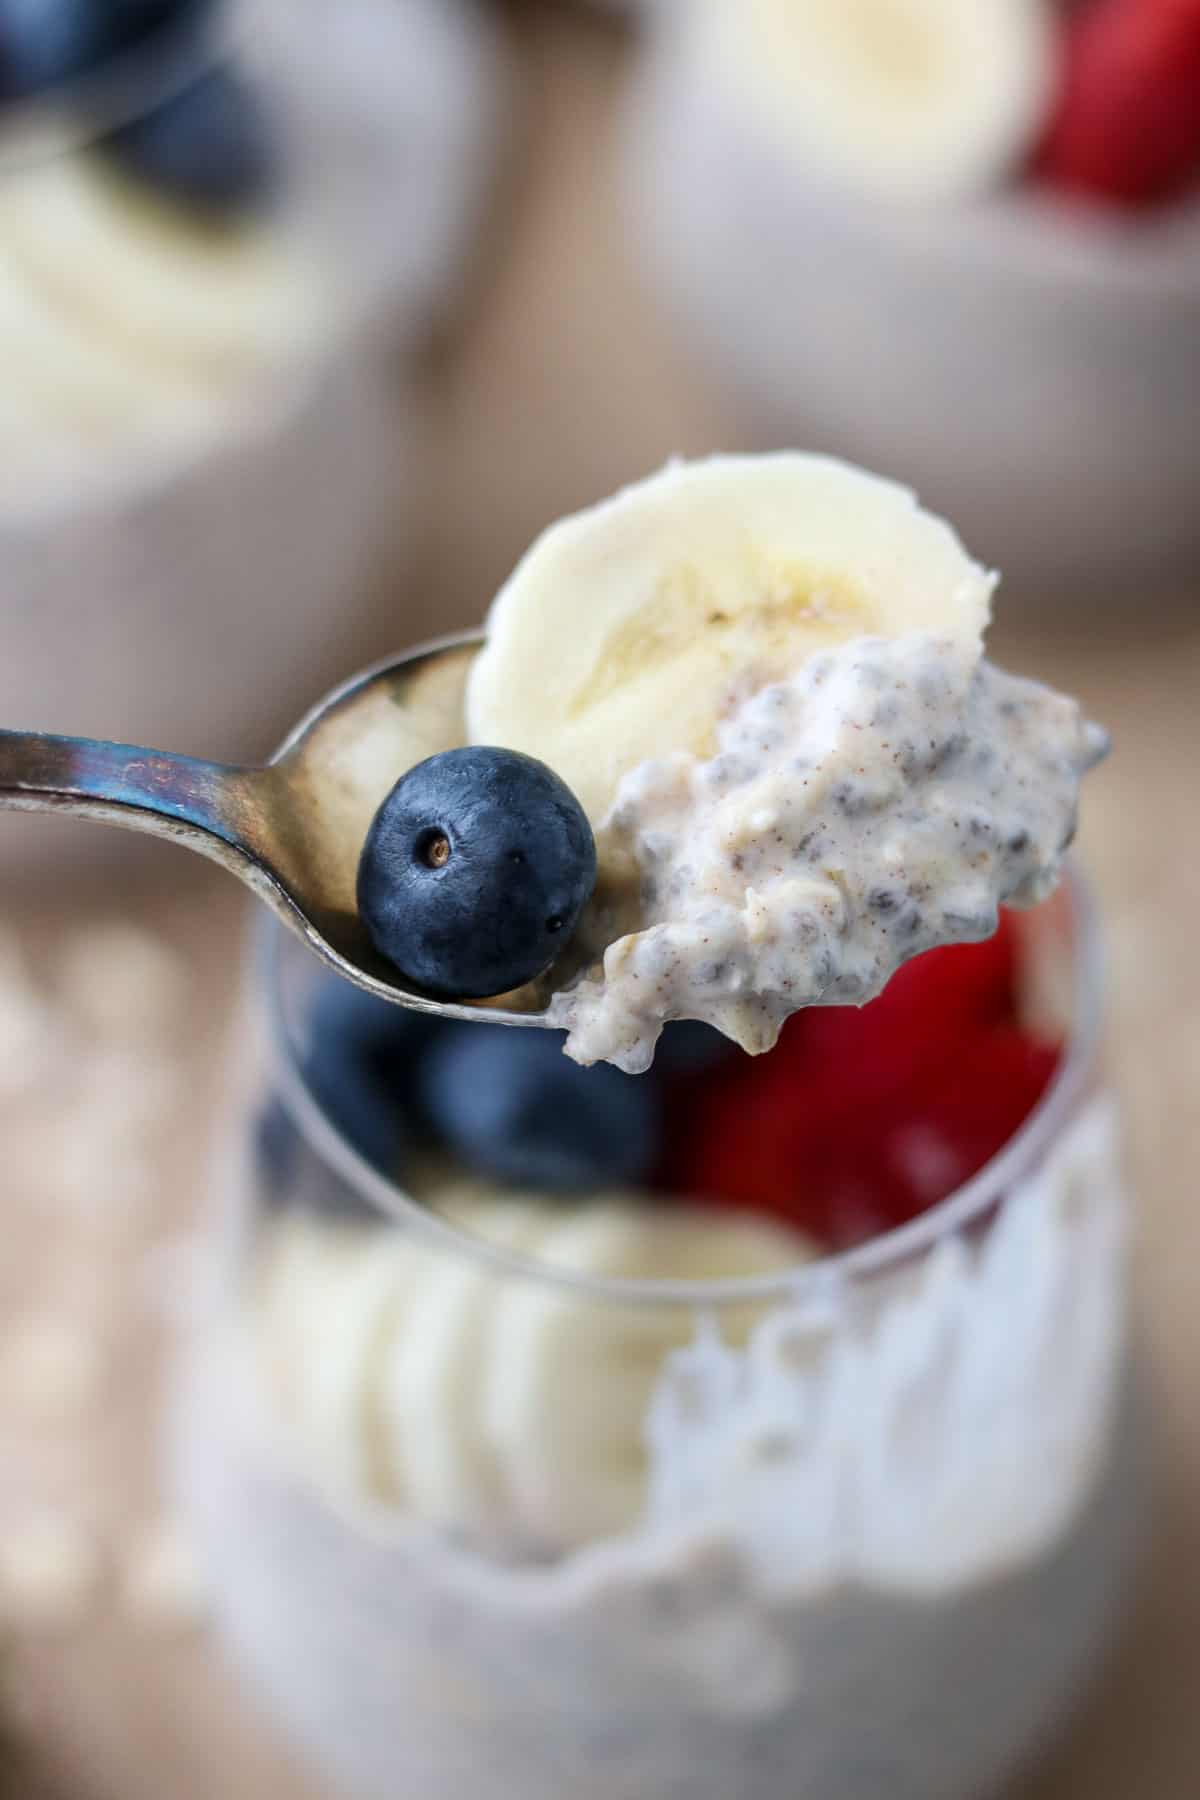 A spoonful of overnight oats, a banana slice and a blueberry on a spoon.